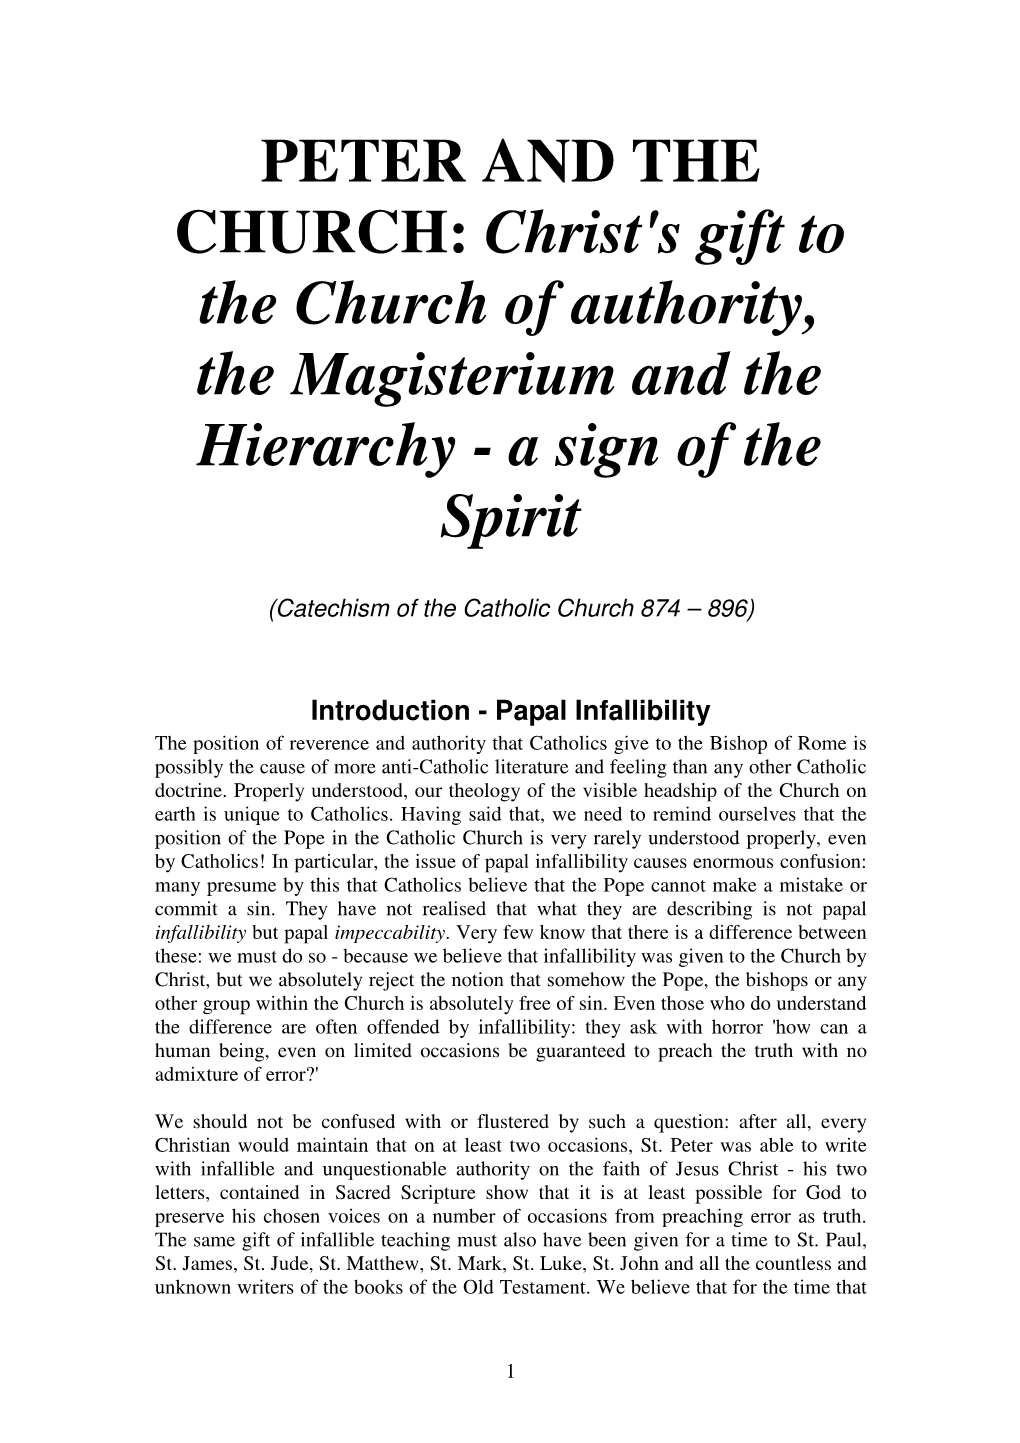 Christ's Gift to the Church of Authority, the Magisterium and the Hierarchy - a Sign of the Spirit